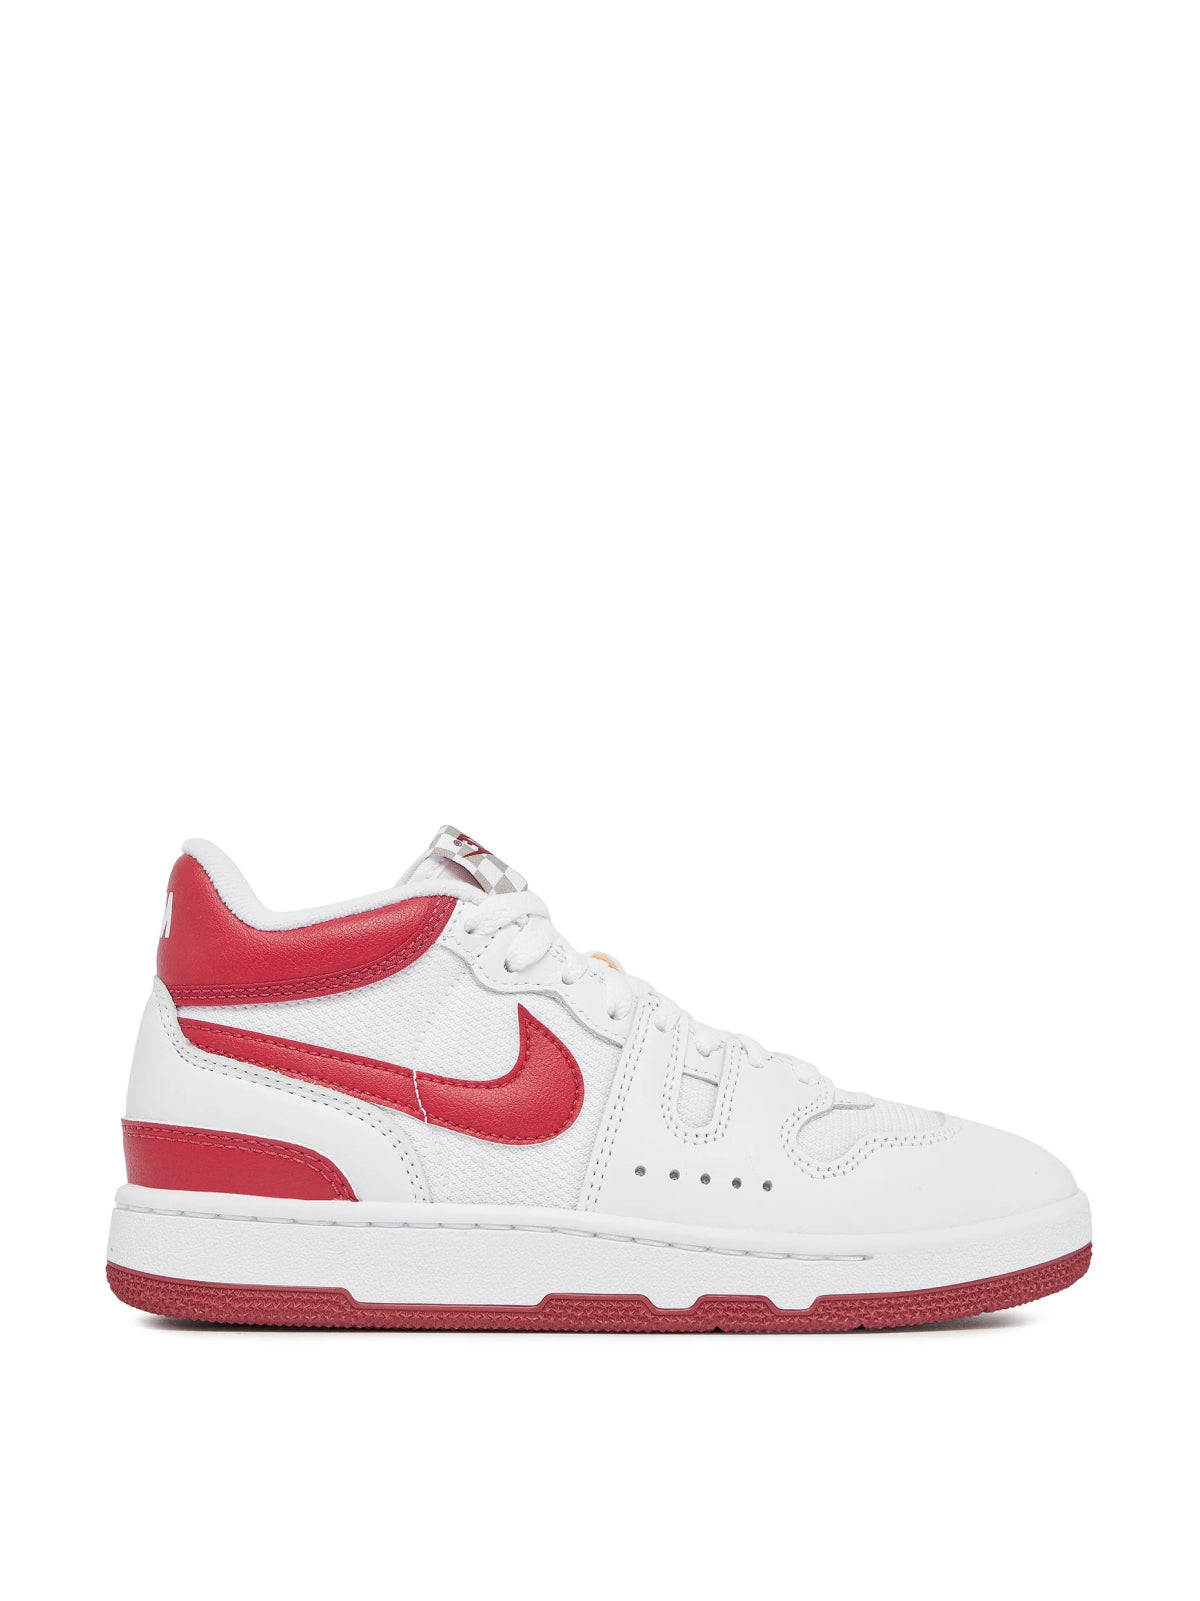 Nike-OUTLET-SALE-Attack QS SP Sneakers-ARCHIVIST